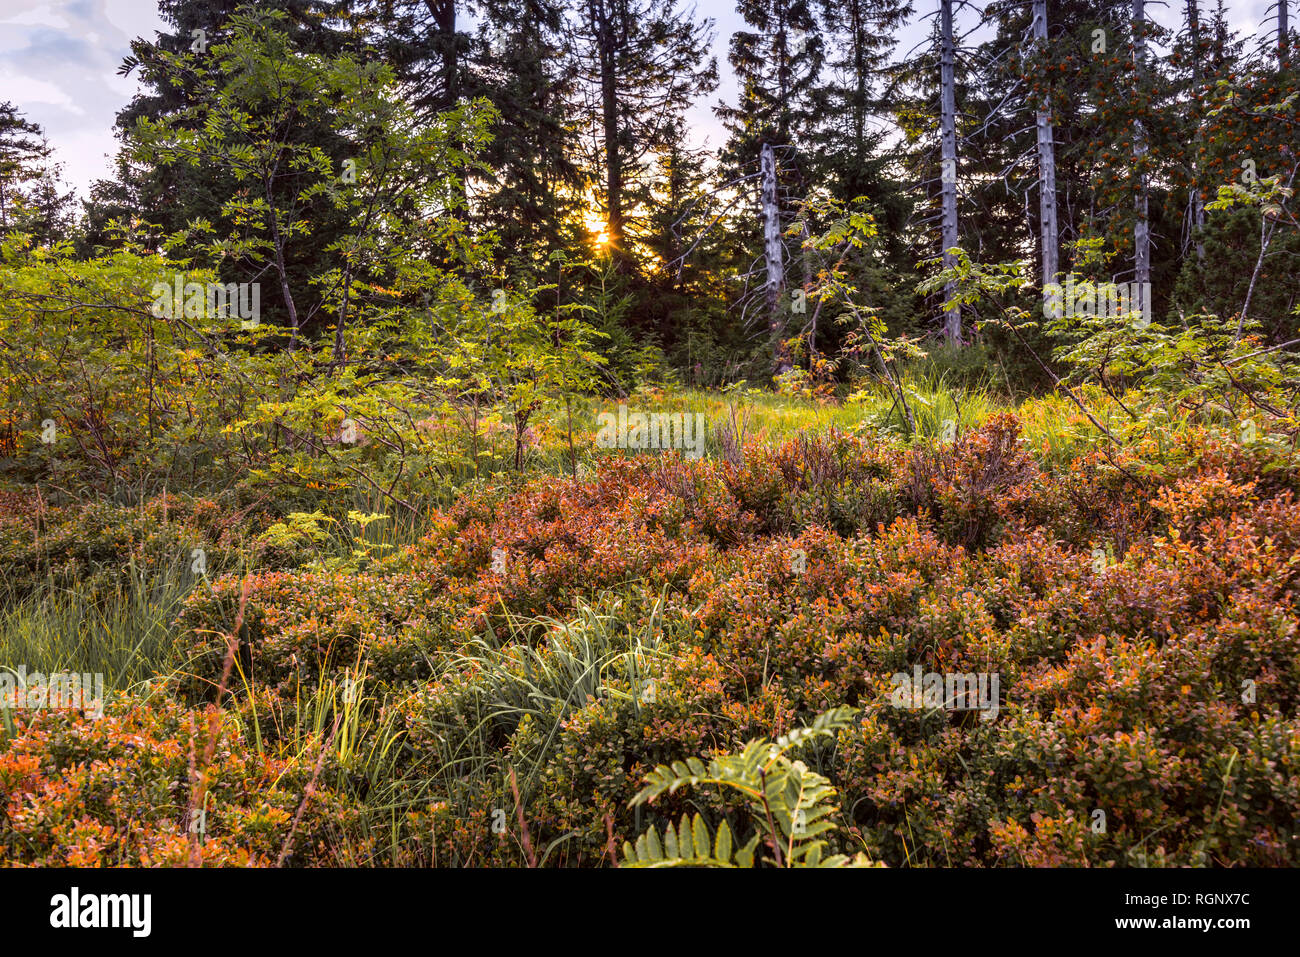 bilberry bushes of the Northern Black forest, mountain Schliffkopf, Germany, nature reserve with deadwood, windthrown trees Stock Photo